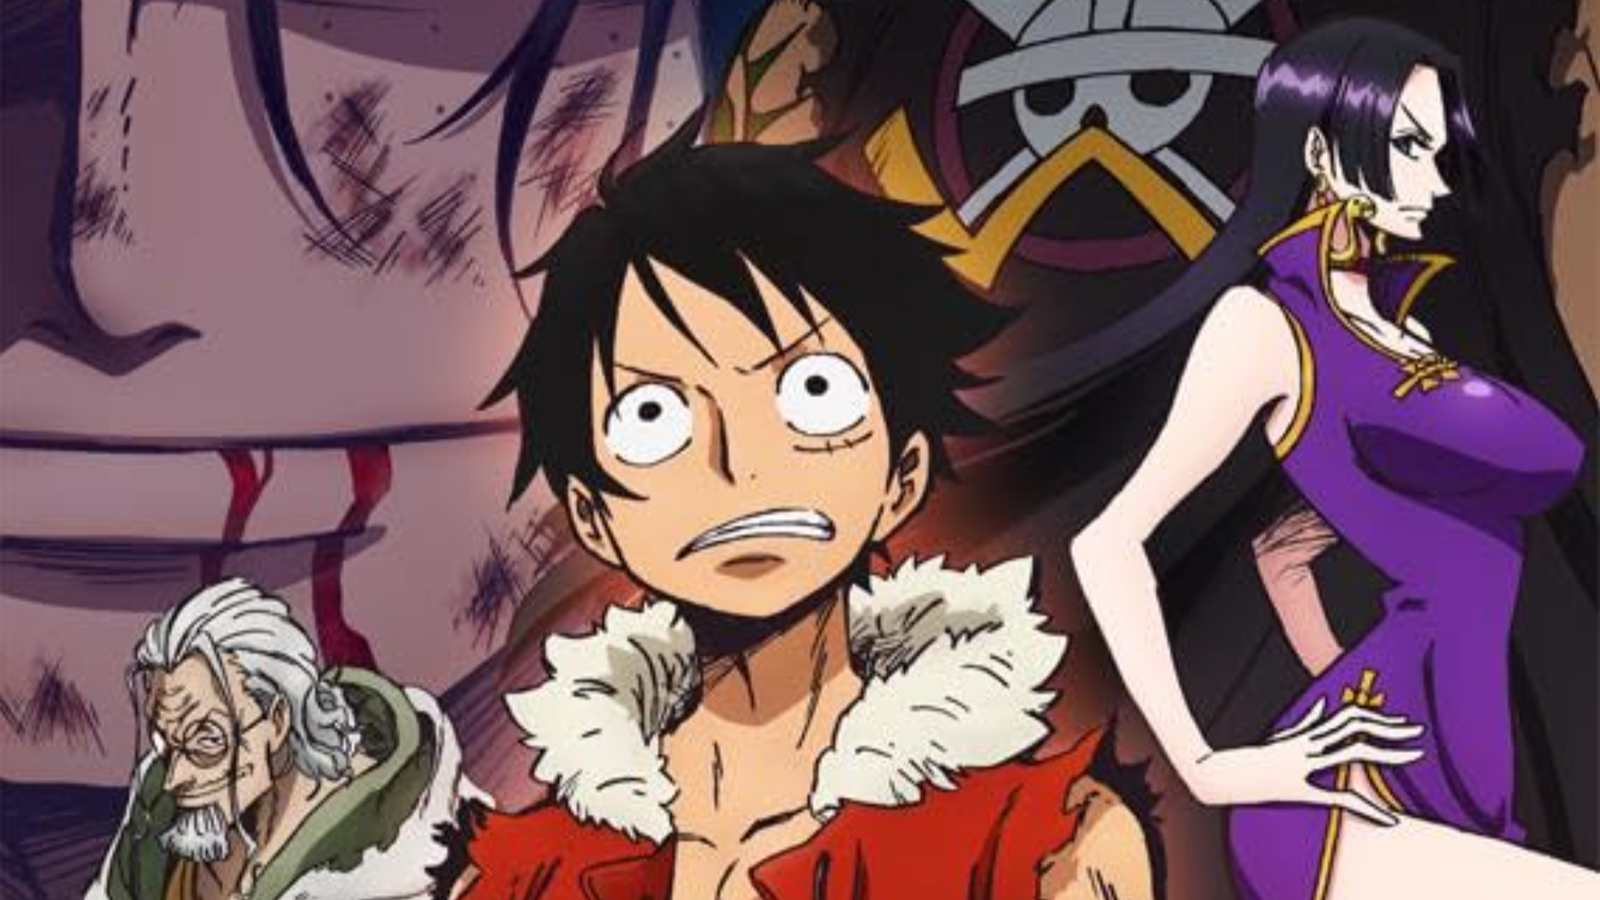 One Piece Episode 1058 Episode Guide – Release Date, Times & More